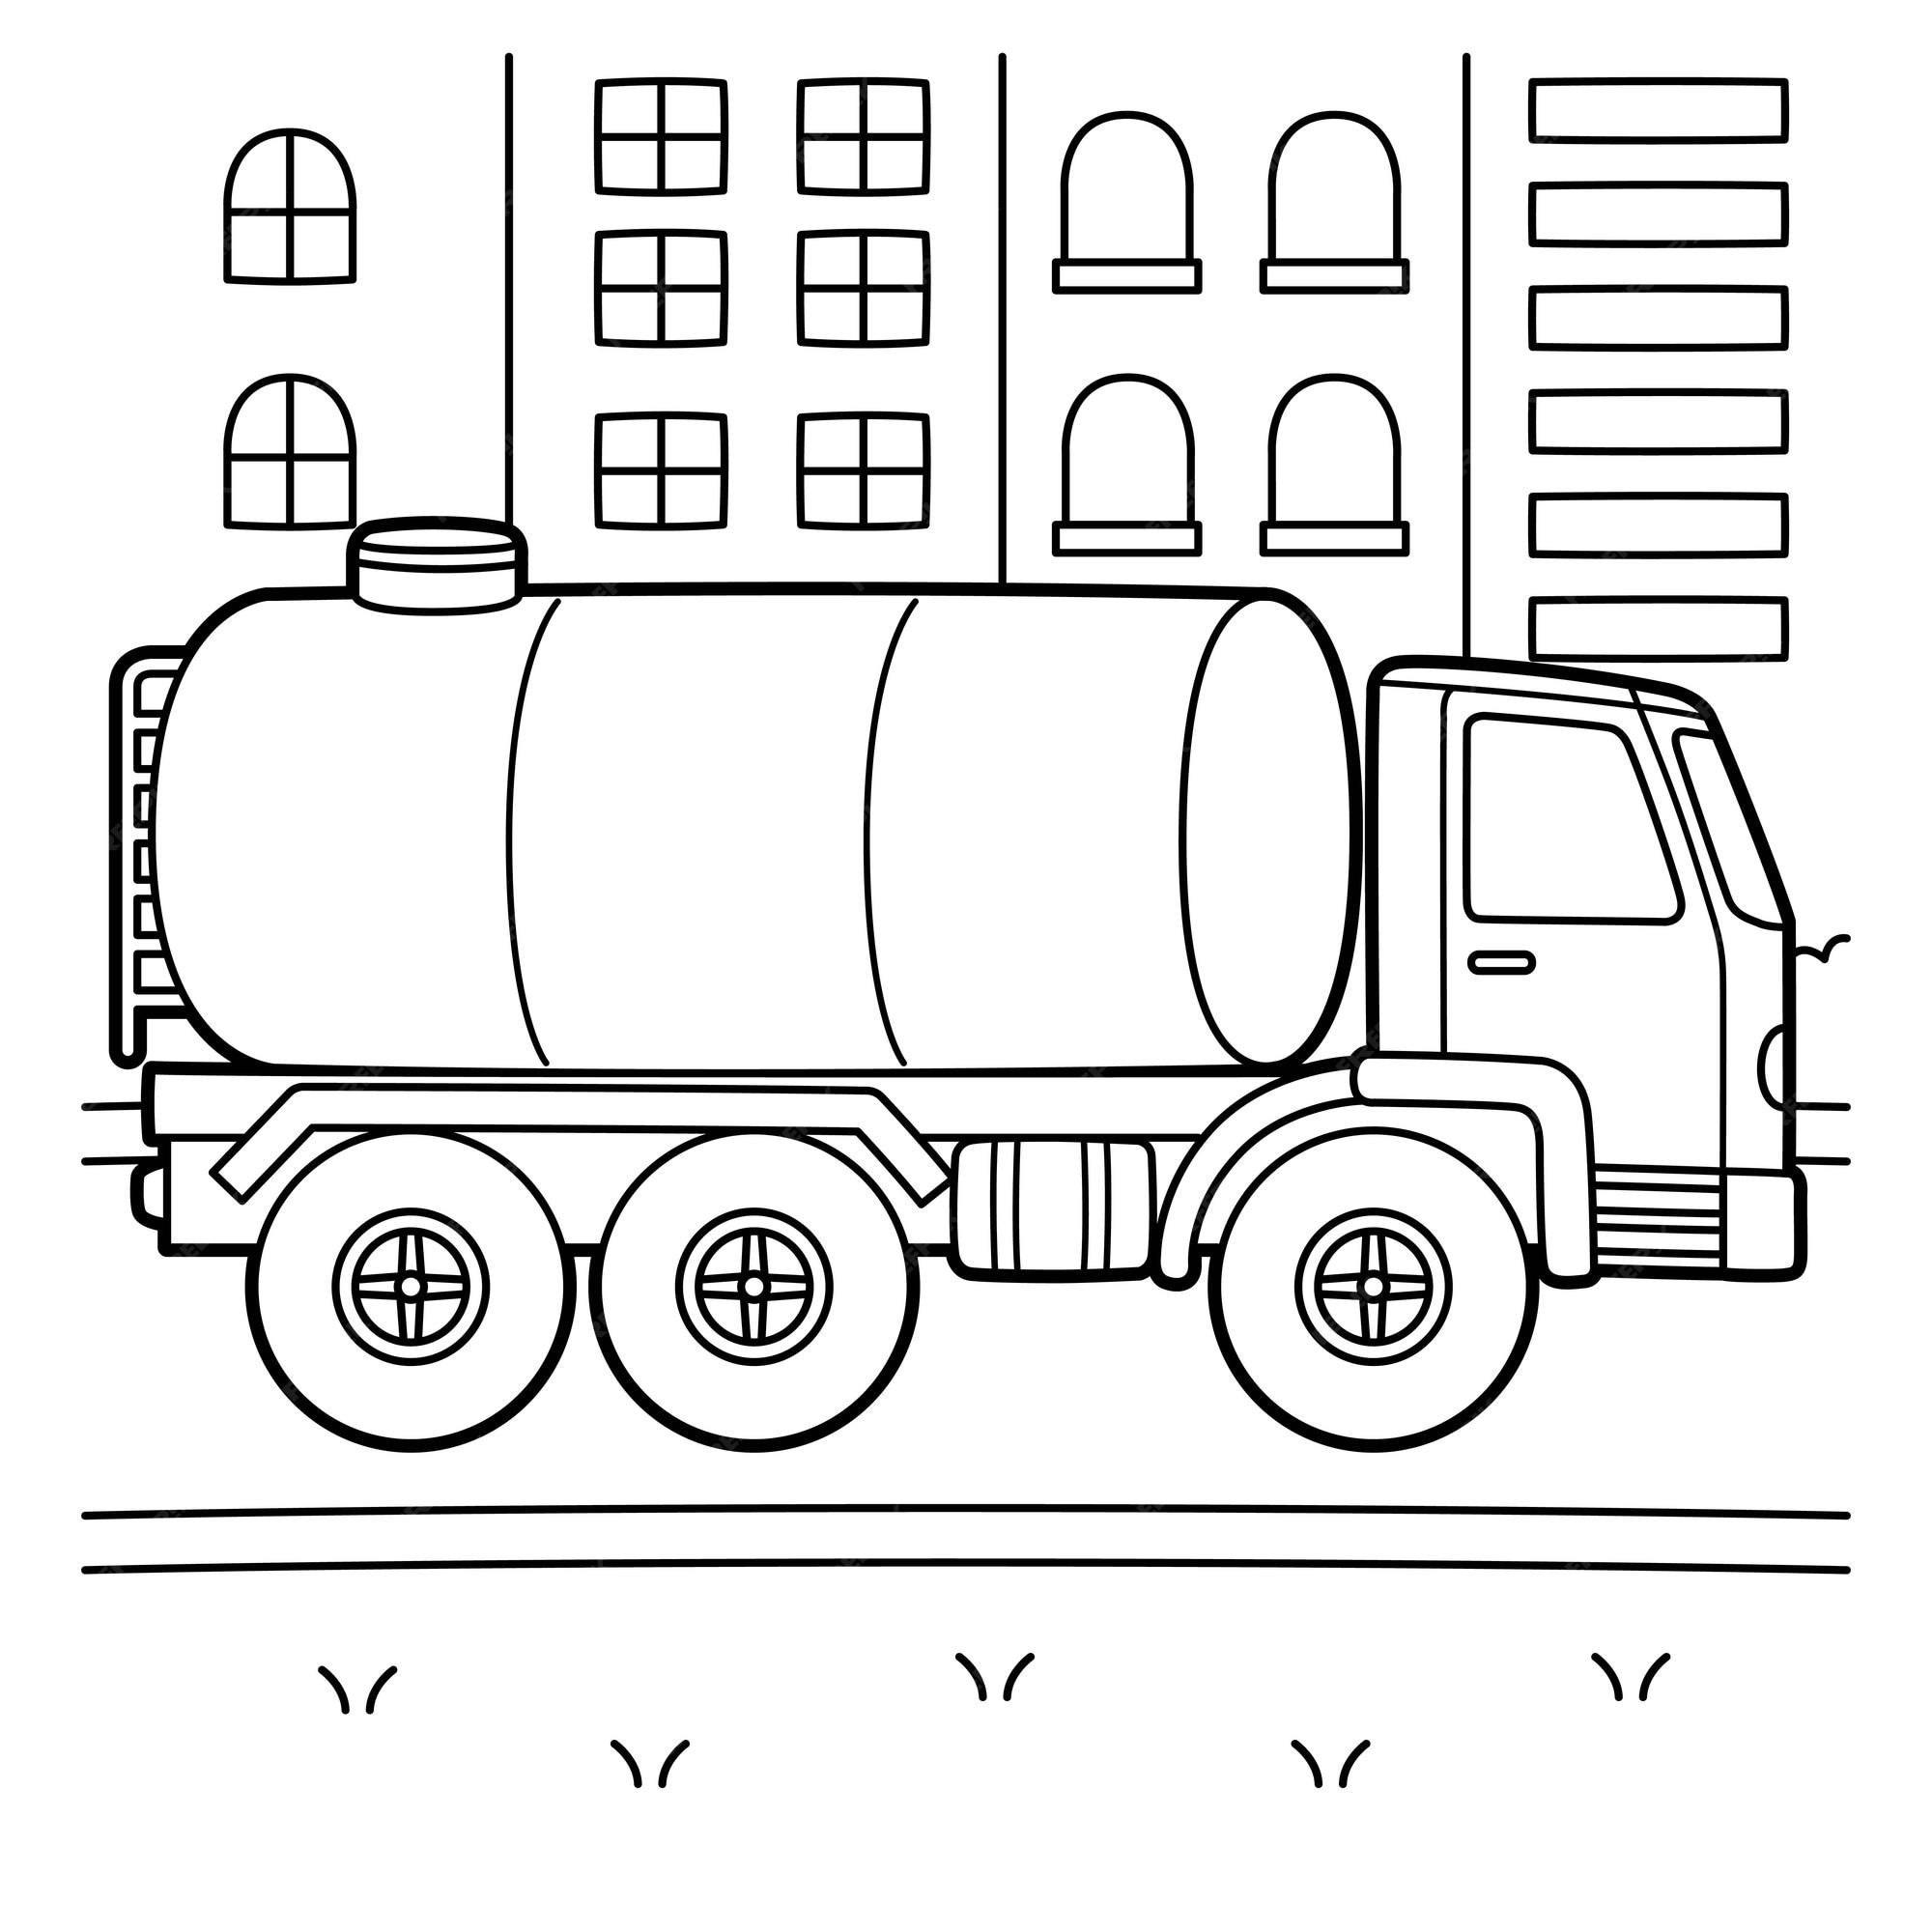 Premium vector water truck vehicle coloring page for kids